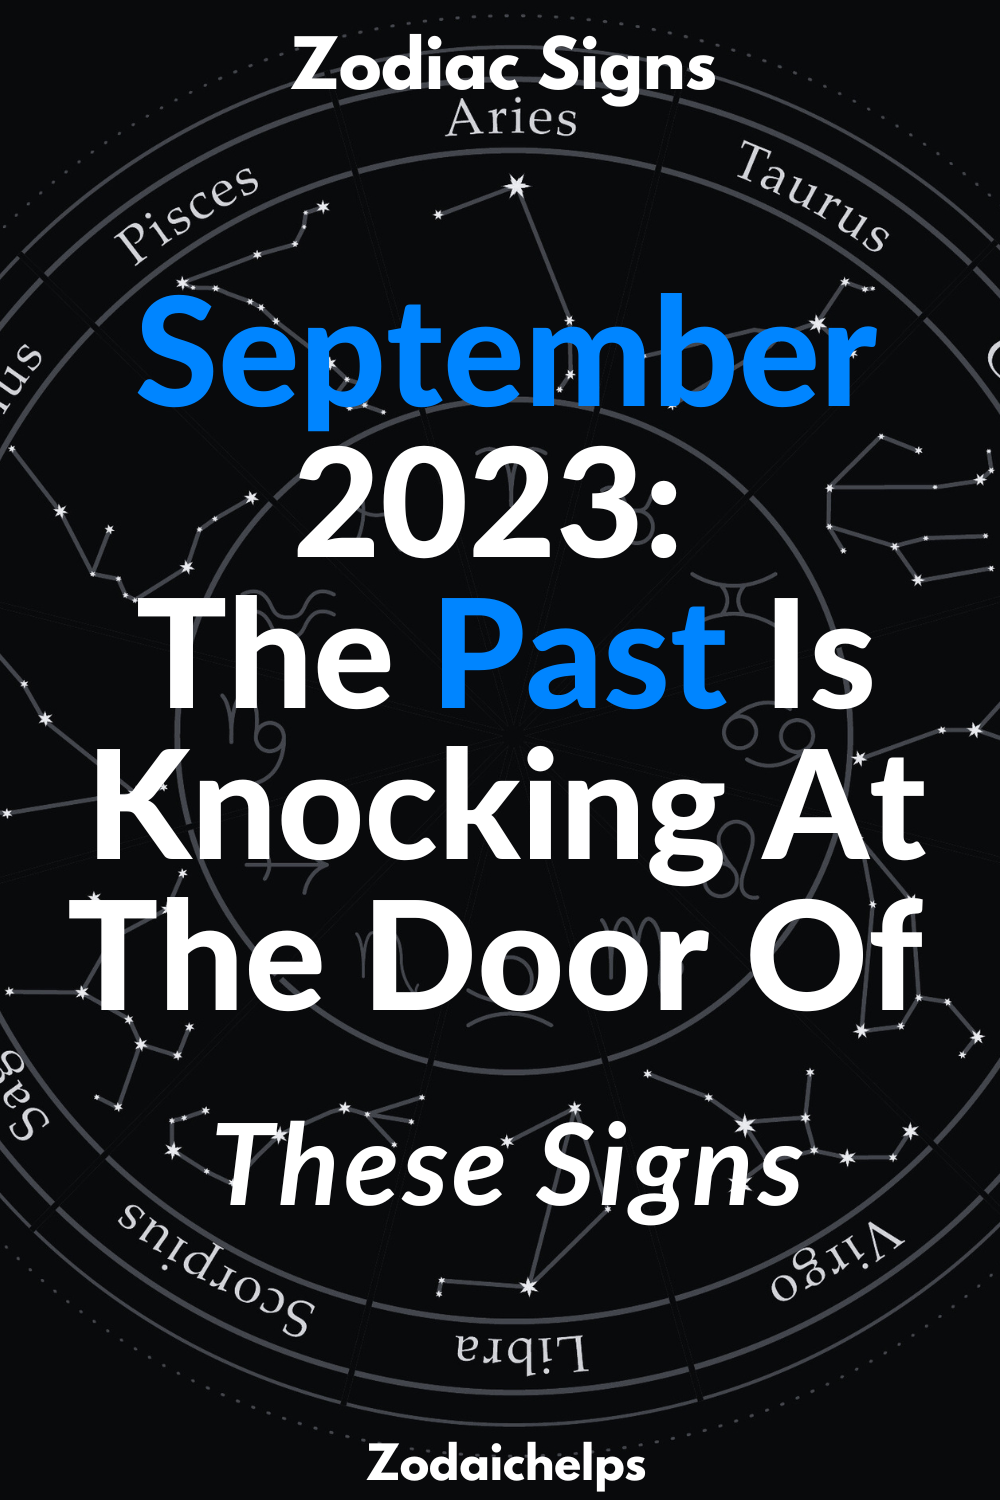 September 2023: The Past Is Knocking At The Door Of These Signs